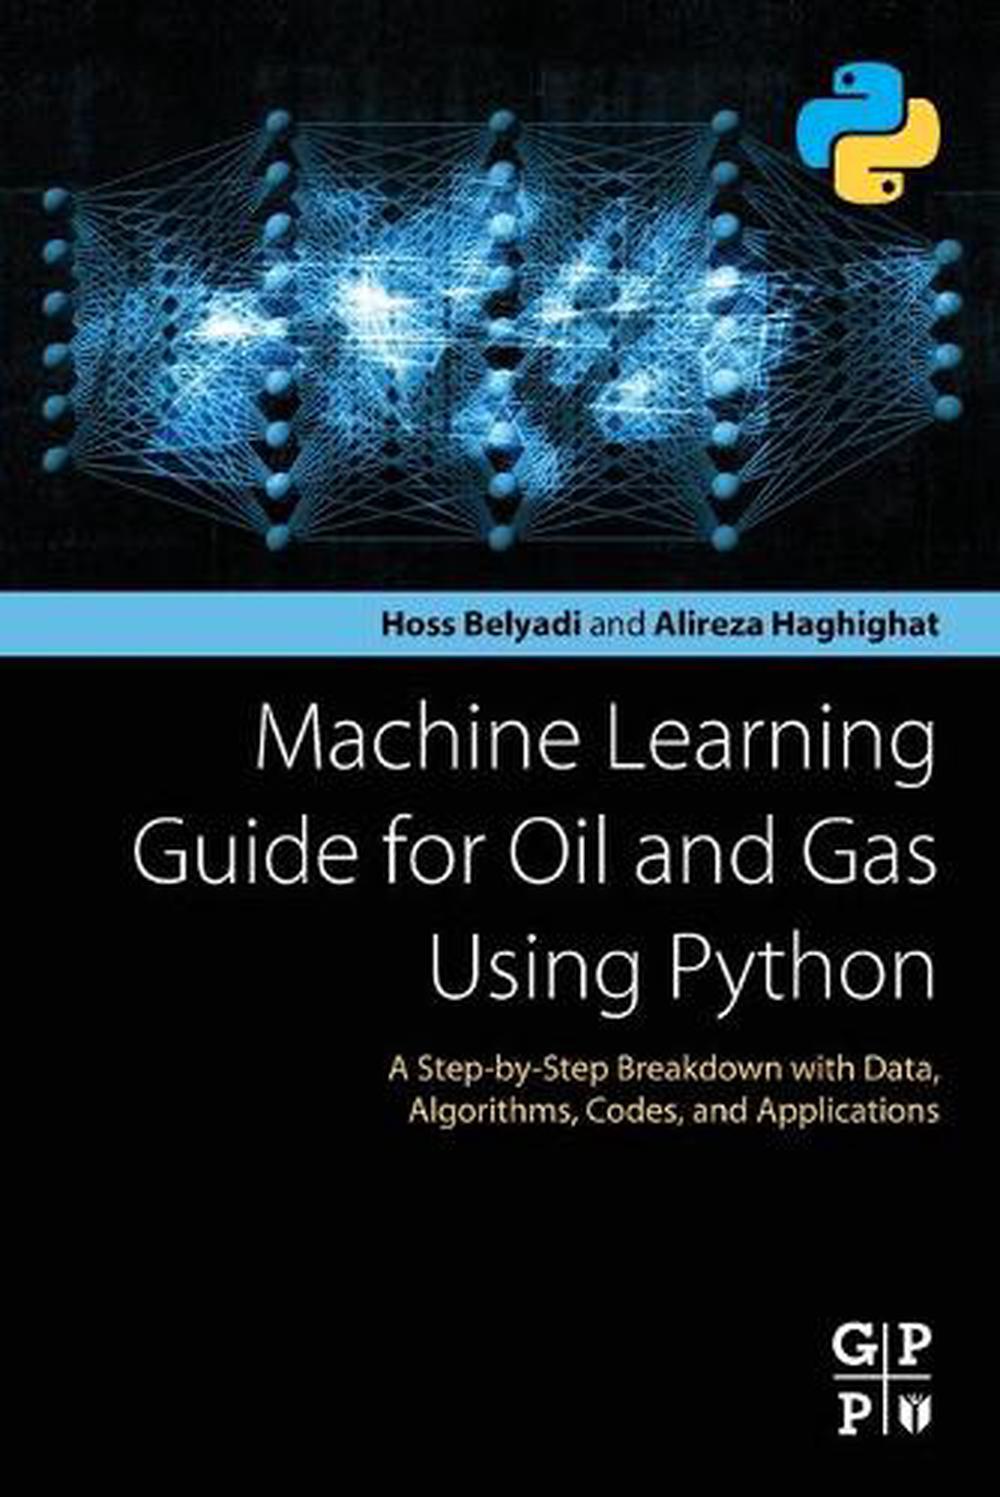 Machine　9780128219294　Haghighat,　The　online　and　Industry　Python　Gas　the　Using　at　Paperback,　Learning　by　Buy　for　Oil　Nile